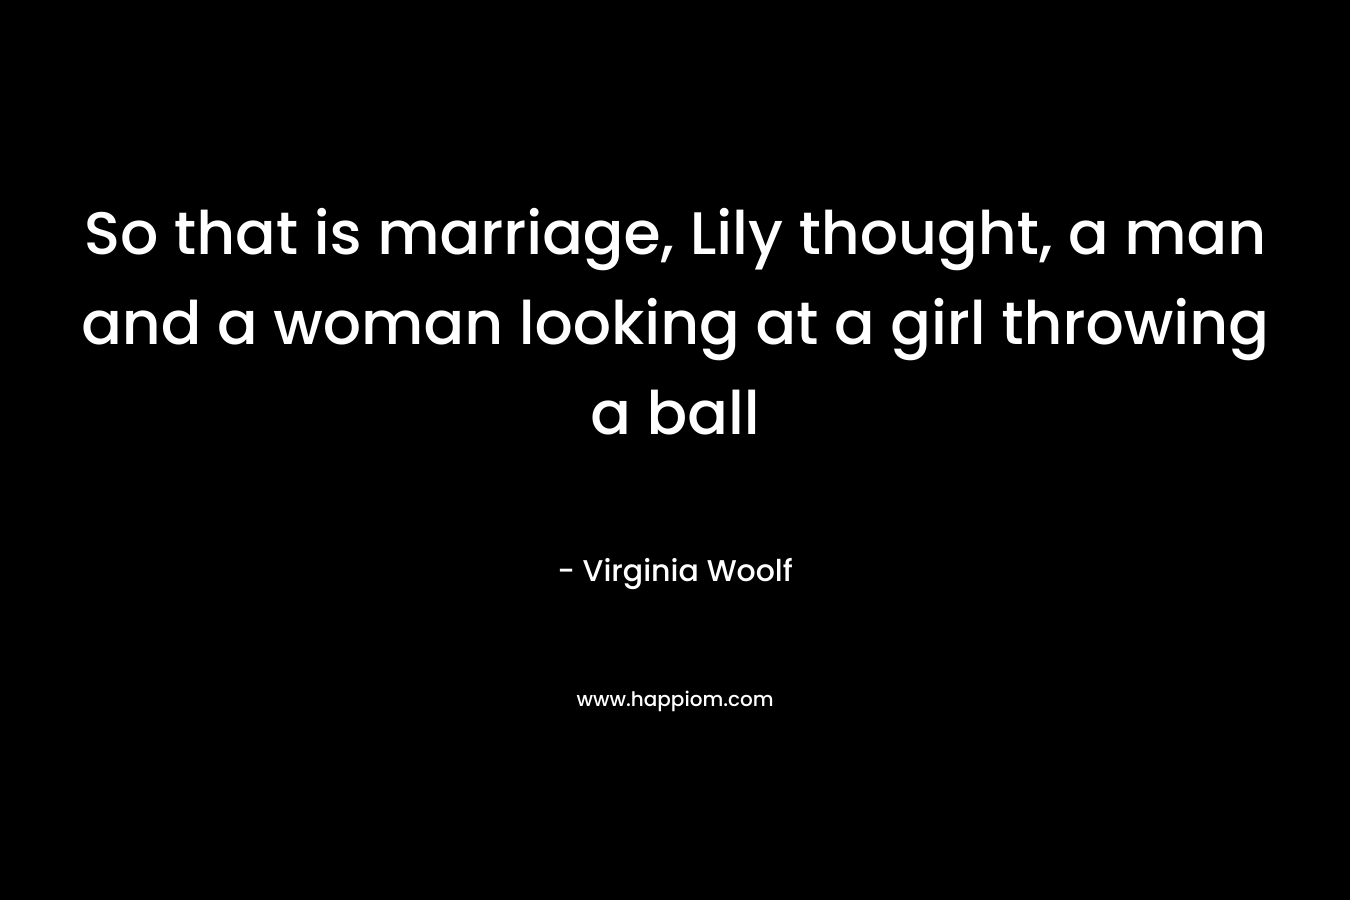 So that is marriage, Lily thought, a man and a woman looking at a girl throwing a ball – Virginia Woolf